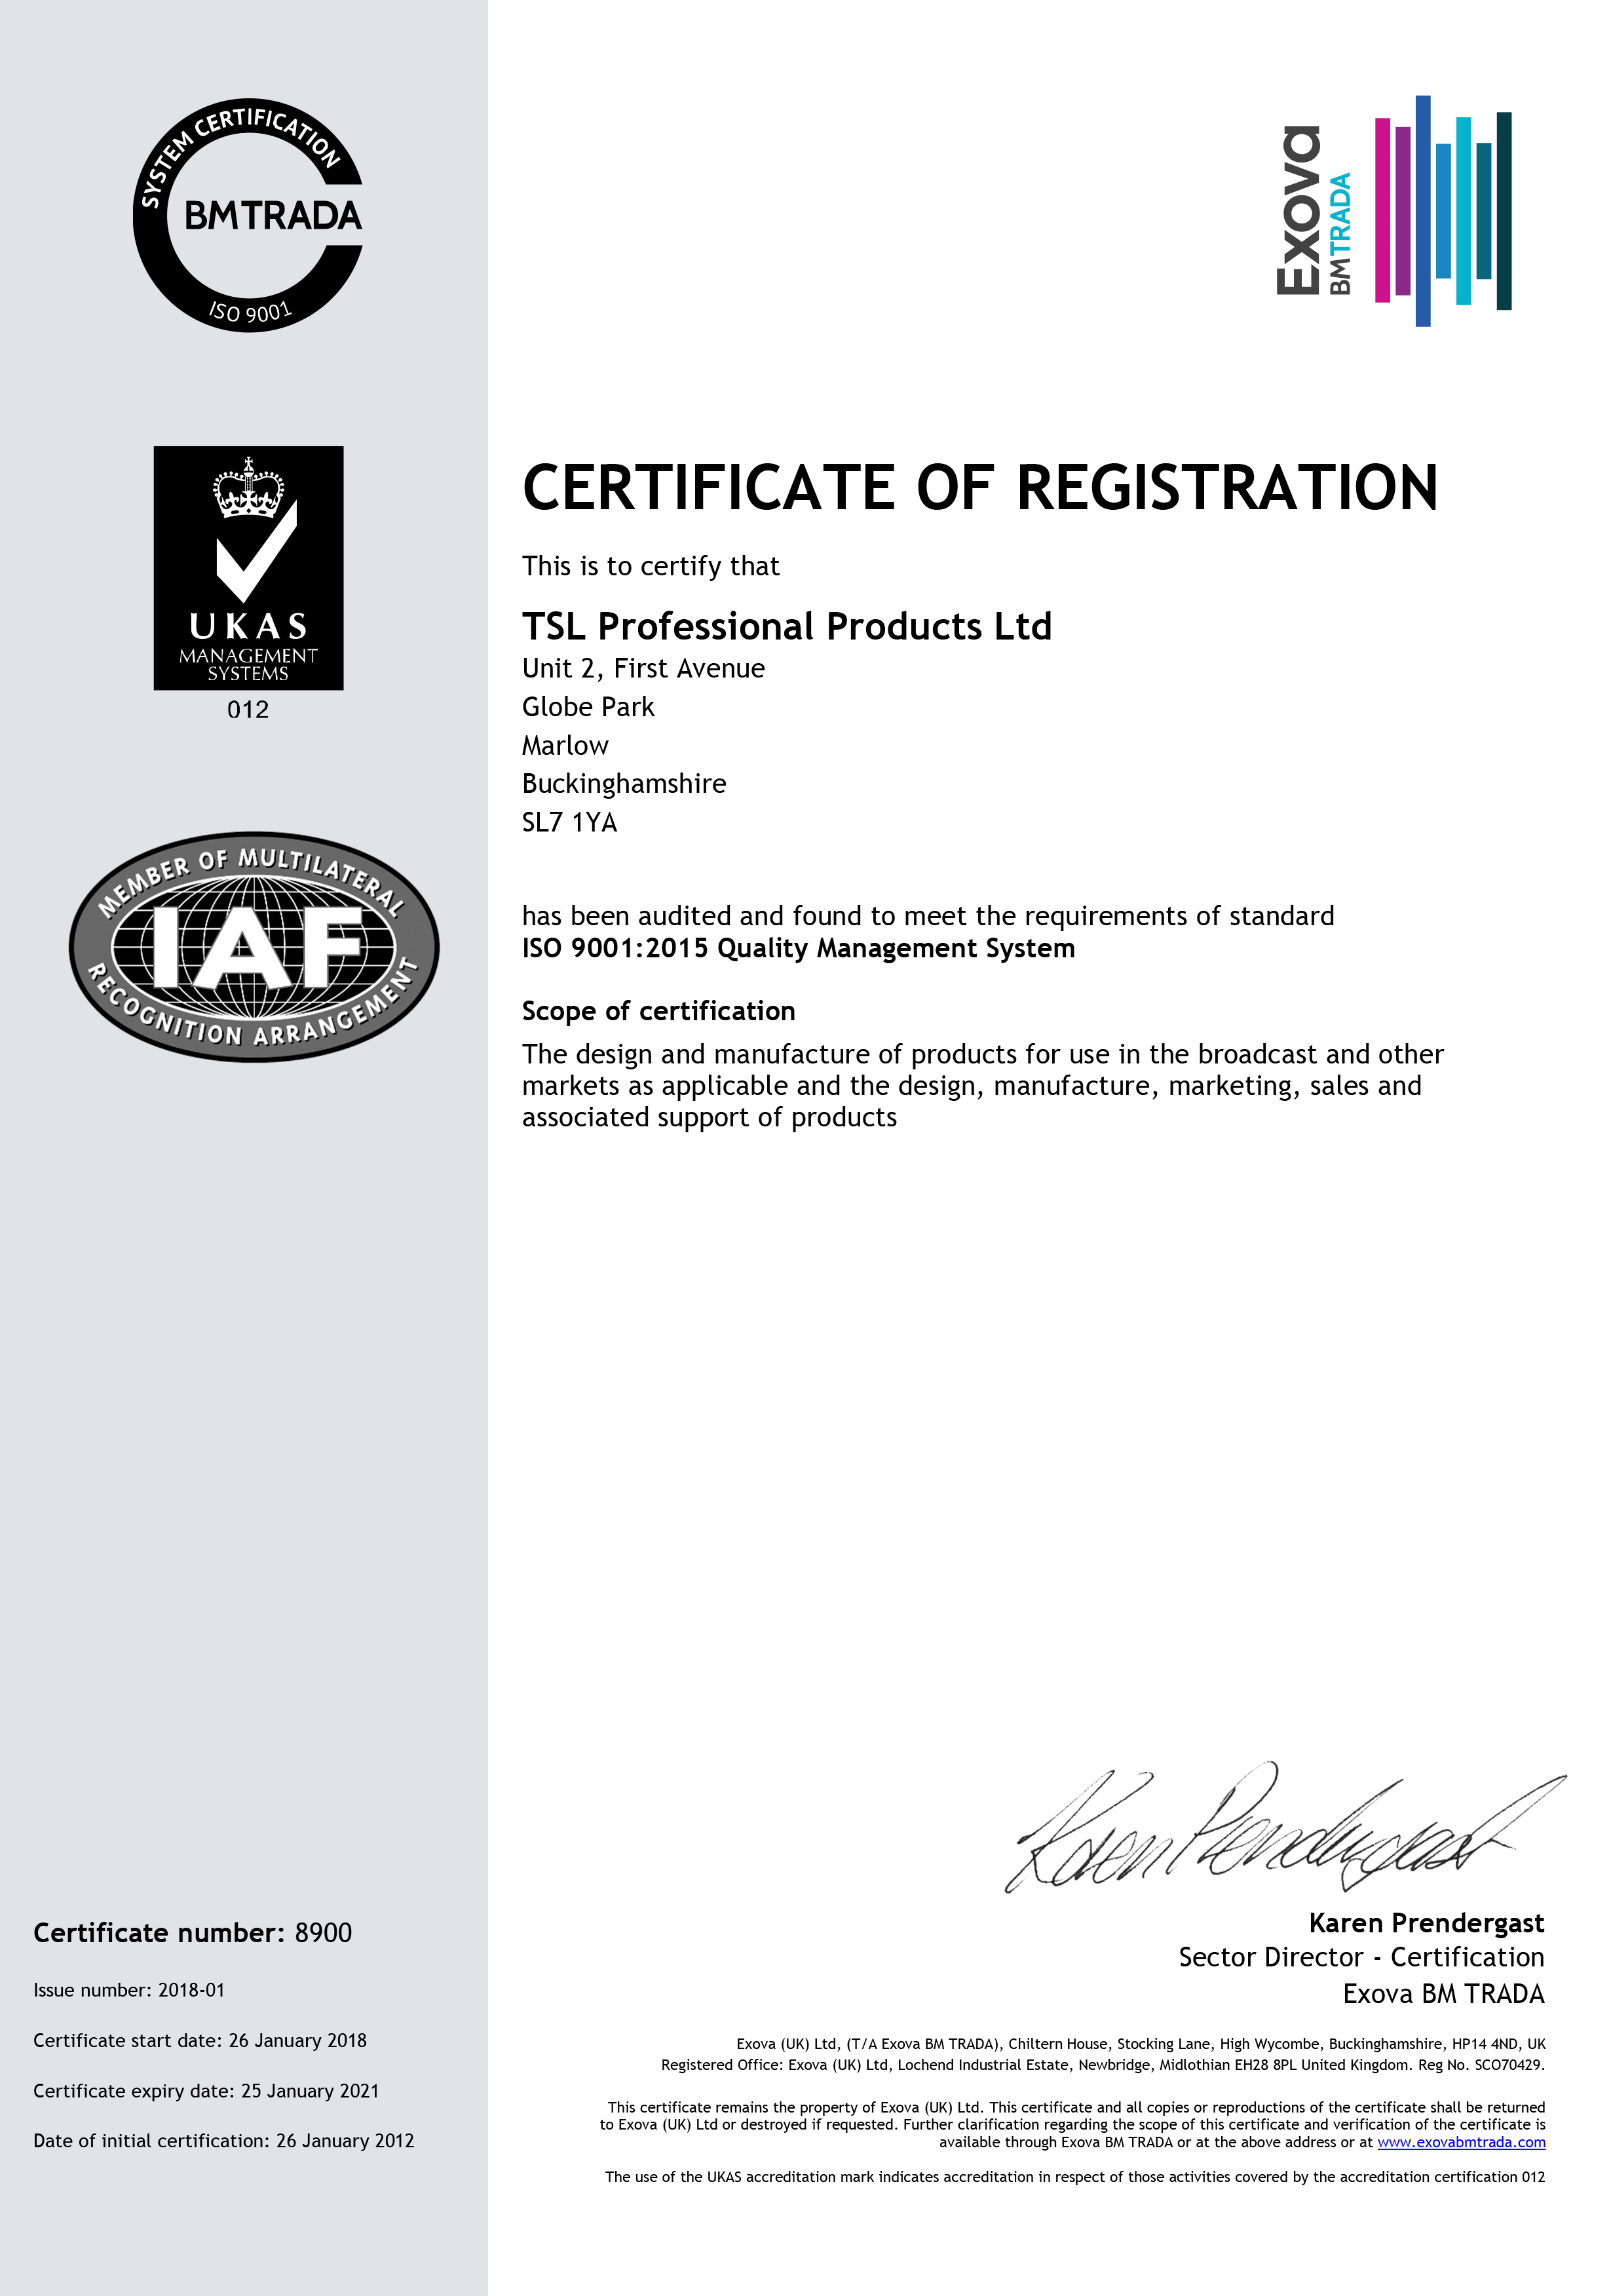 Black and White Certificate Logo - ISO9001 Certification